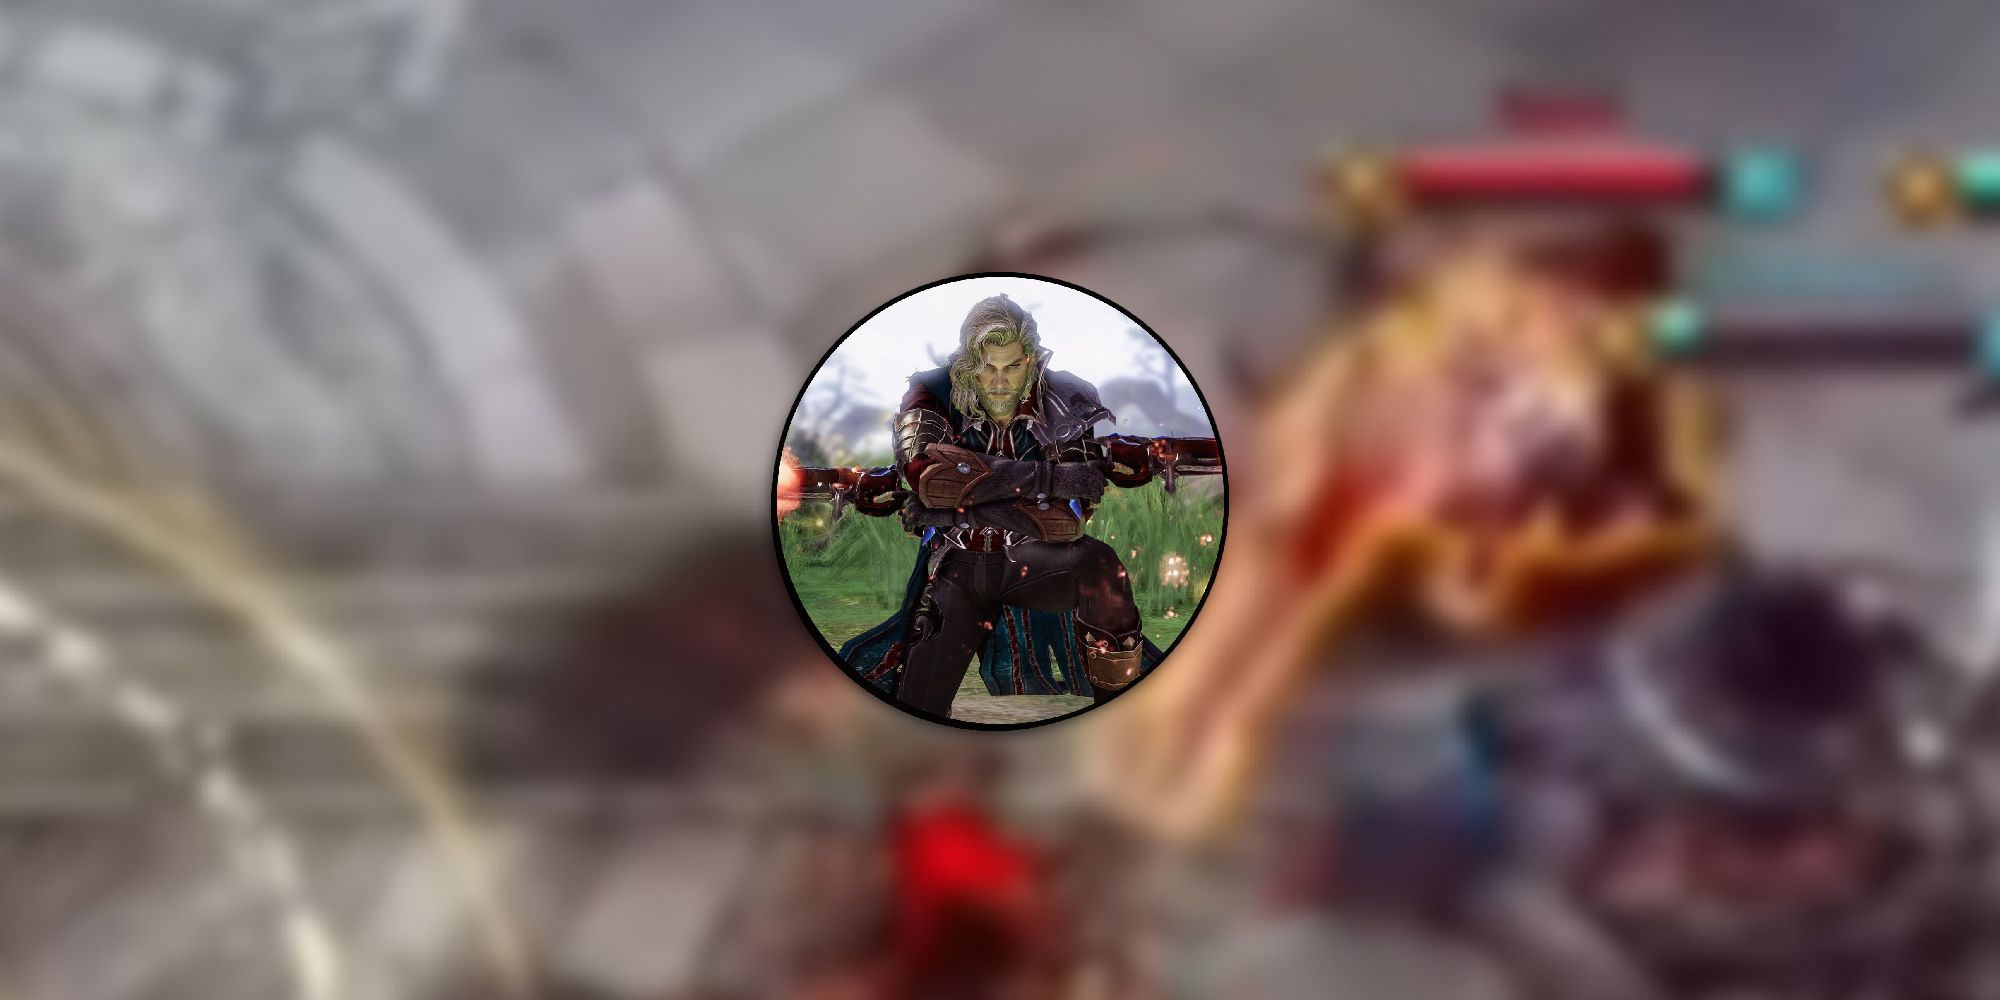 Lost Ark - Blurred Image Of Destroyer Full-Diving Into The Enemy PvP Team With A PNG Of A Gunslinger Overlaid On Top